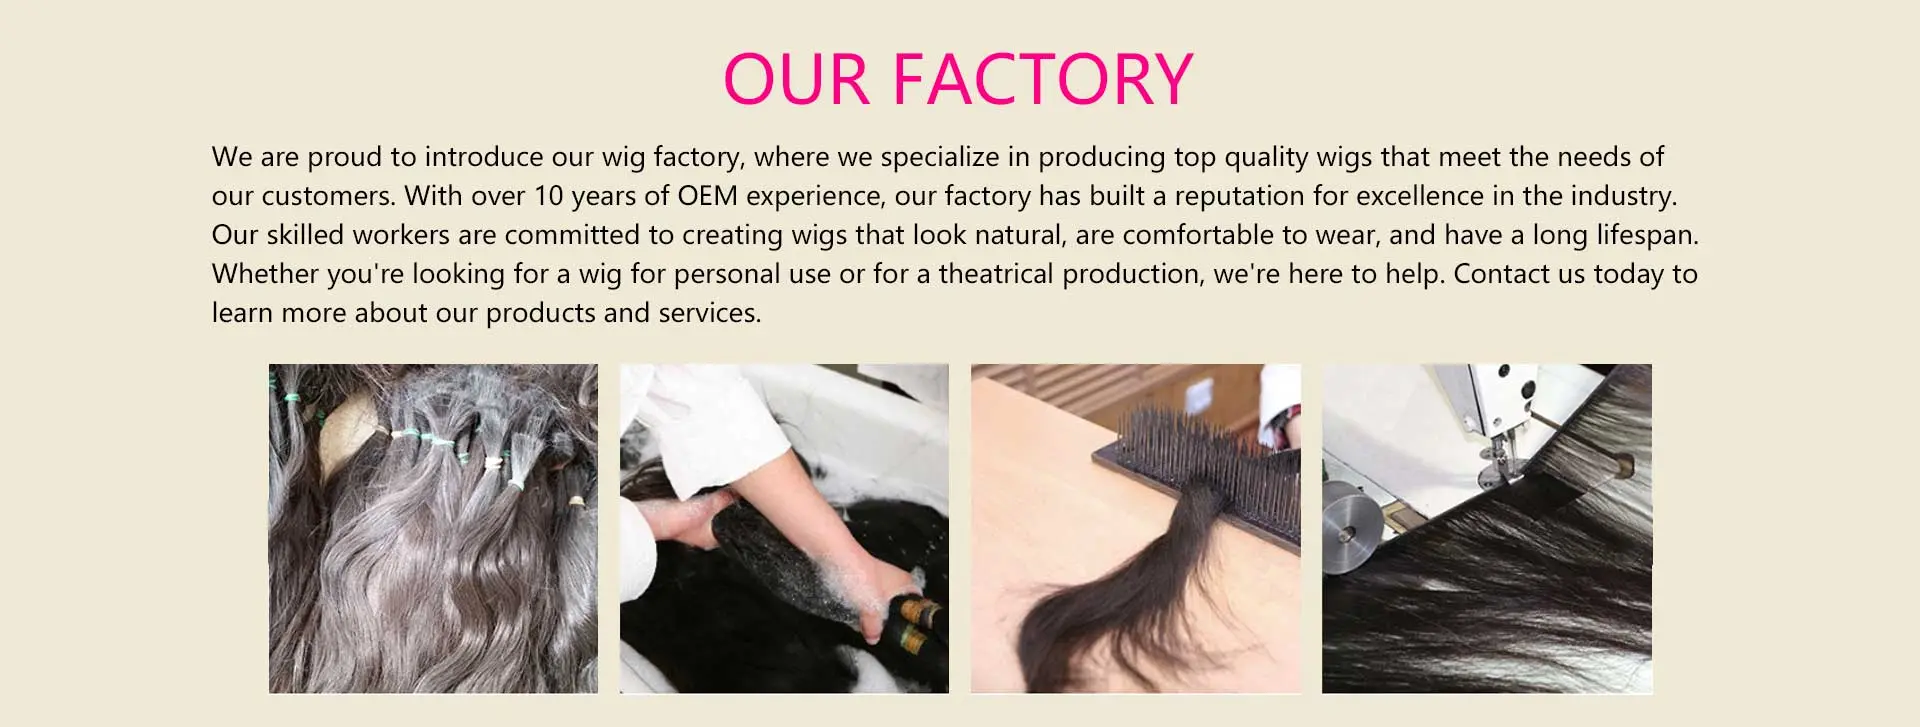 With over ten yeas experience in OEM manufacturing, our factories has a lineup of approximately 3,000 hair products in stock, that allows us to meet the needs of our customers. With our design, production, style departments and our skilled workers, our factory has the ability to offer top-quality human hair products in variety of style.